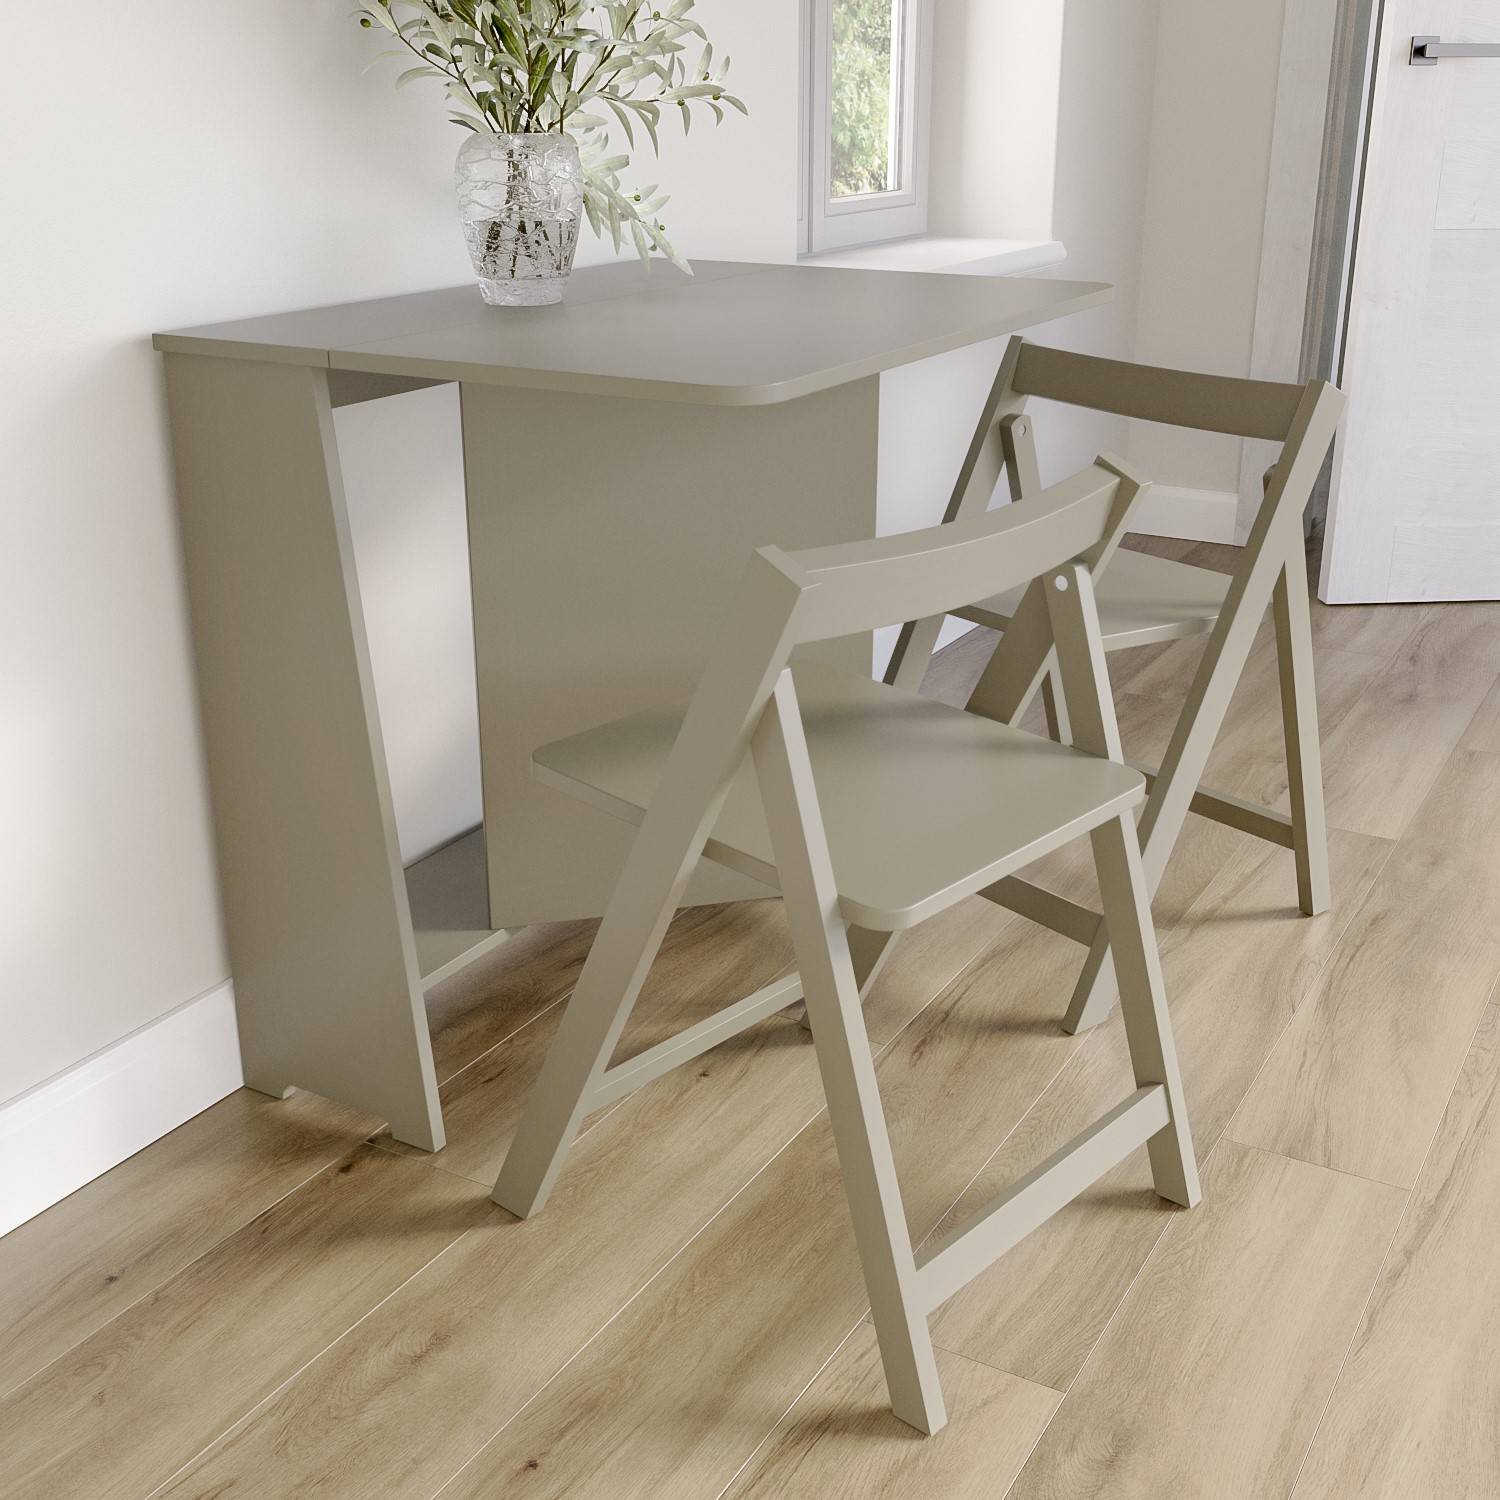 Read more about Taupe space saving drop leaf dining table and chairs seats 2 kylee